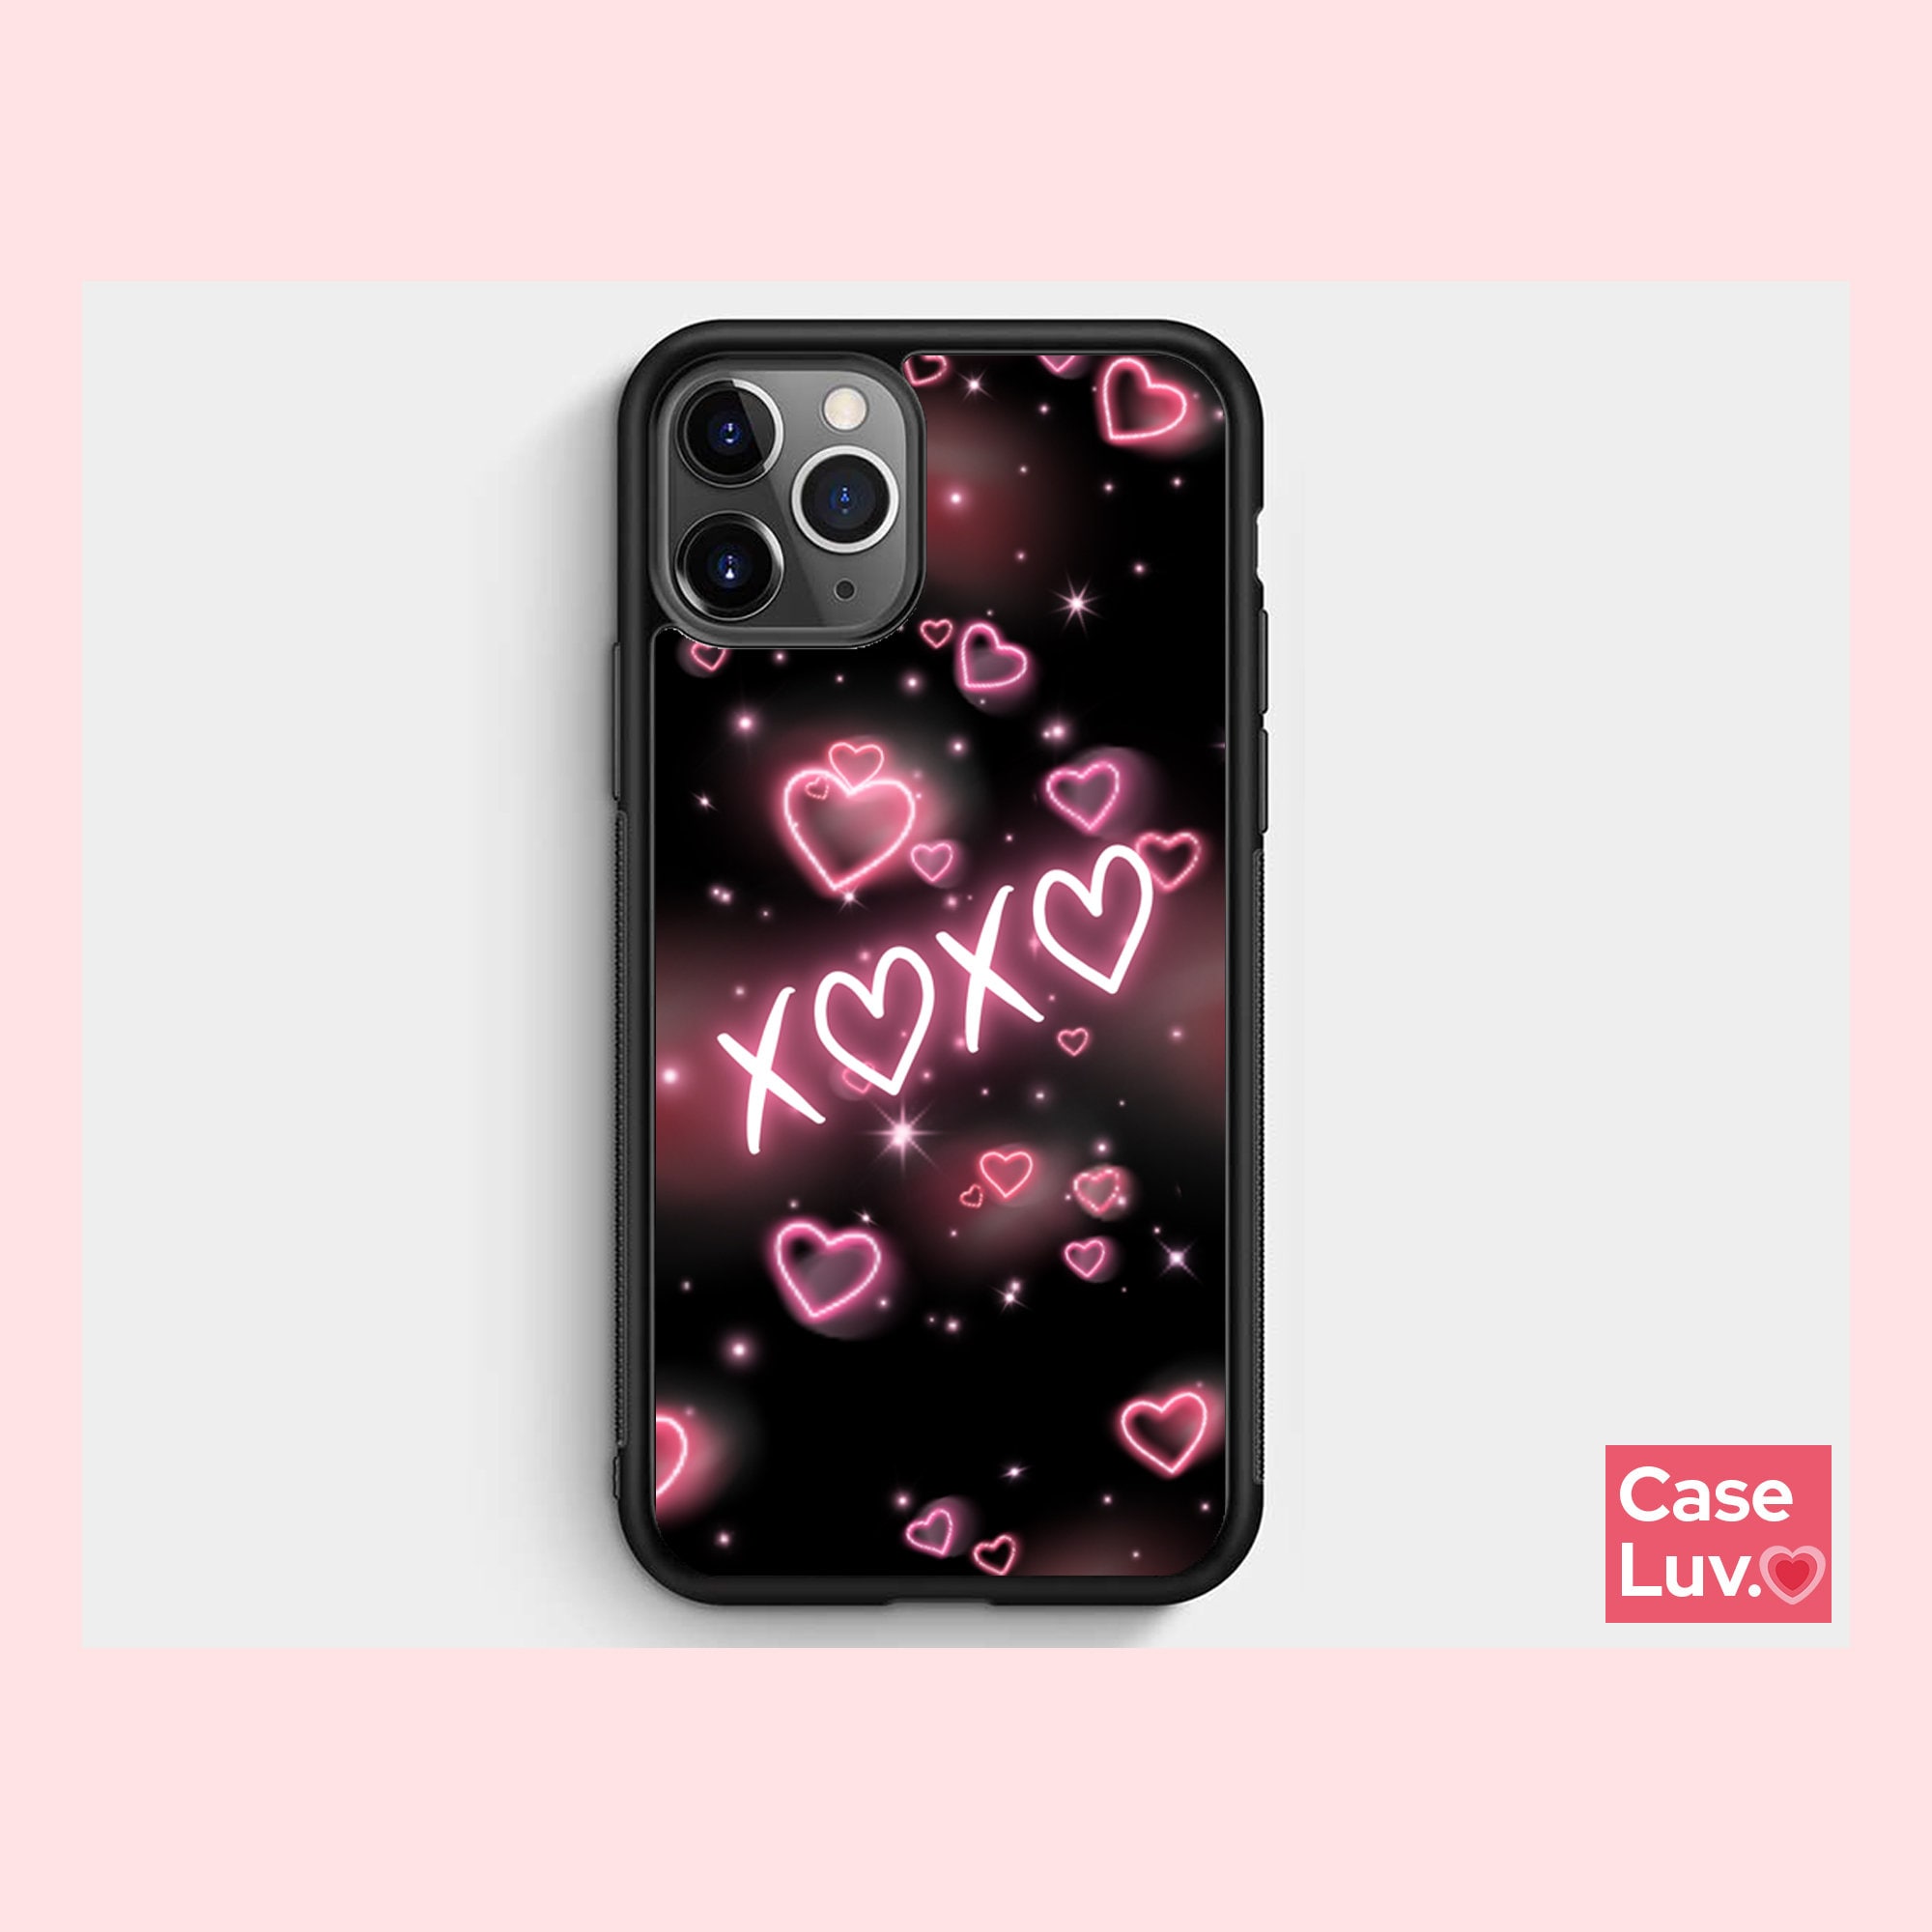 Blush LOVE - XOXO - iPhone Wallet Case by Better HOME